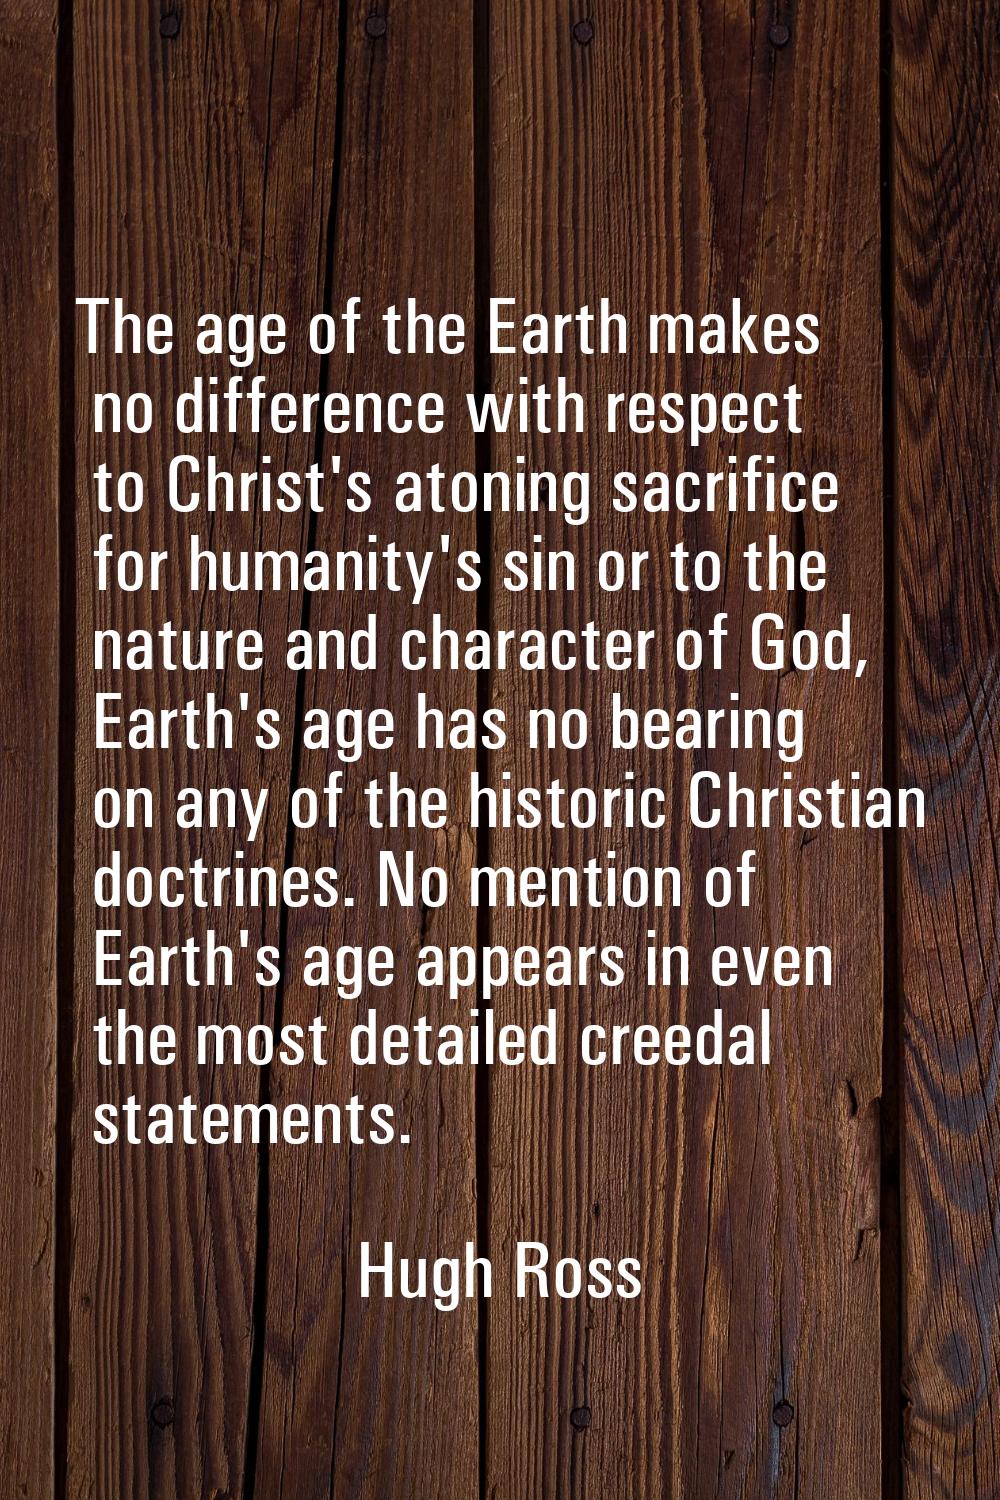 The age of the Earth makes no difference with respect to Christ's atoning sacrifice for humanity's 